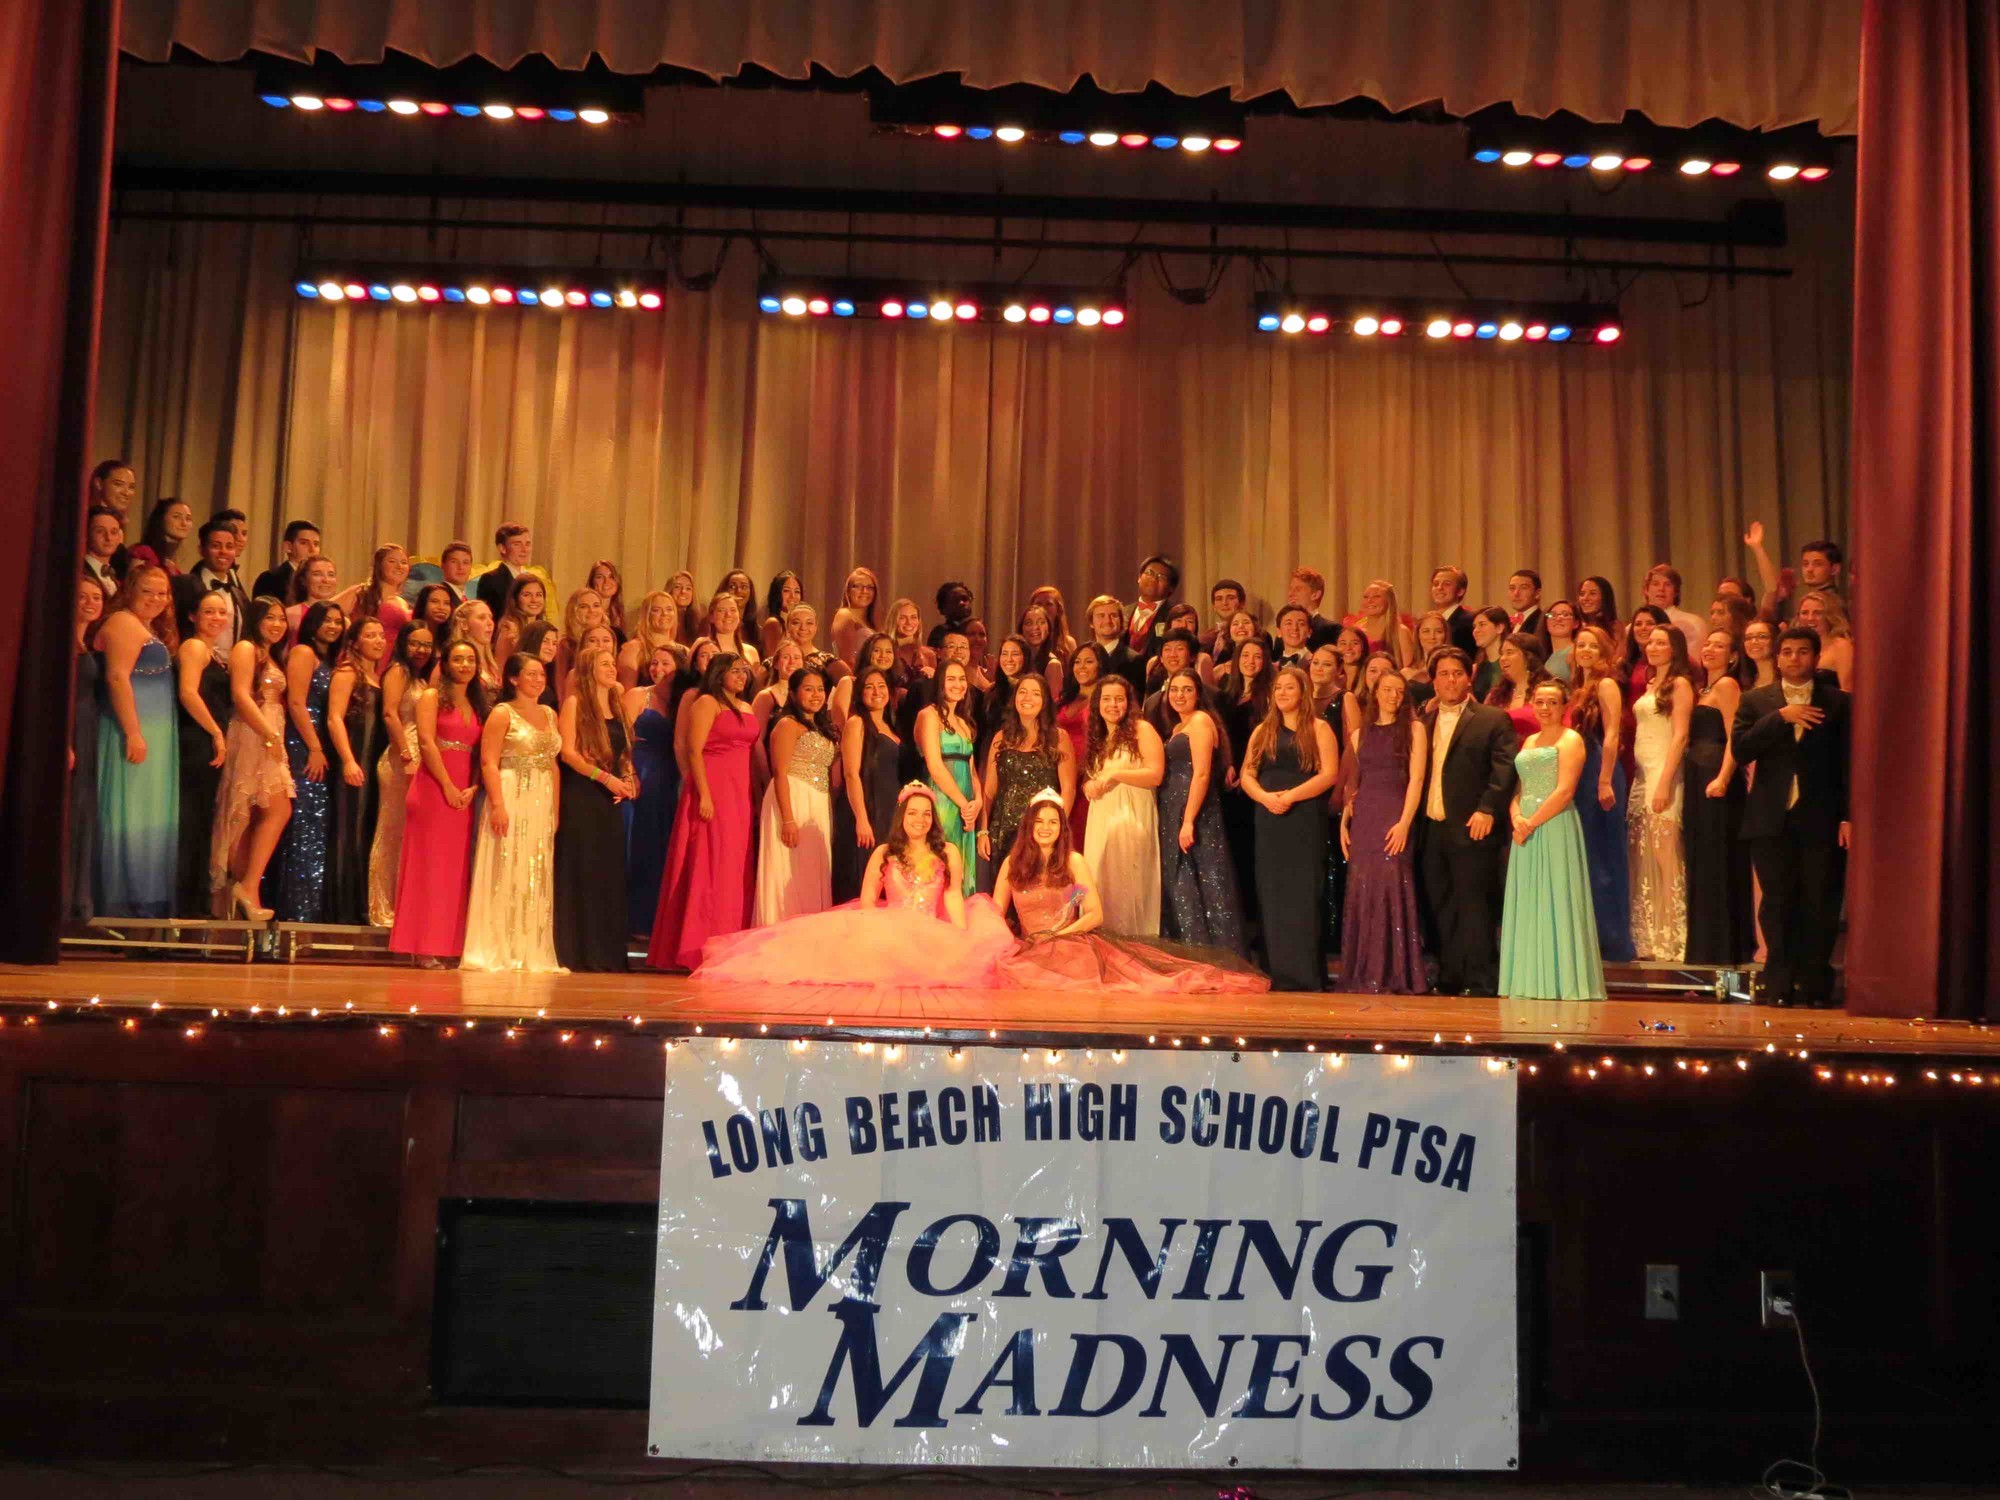 The entire group of models gathered for a grand finale to the 2016 Morning Madness Fashion Show at Long Beach High School March 9.